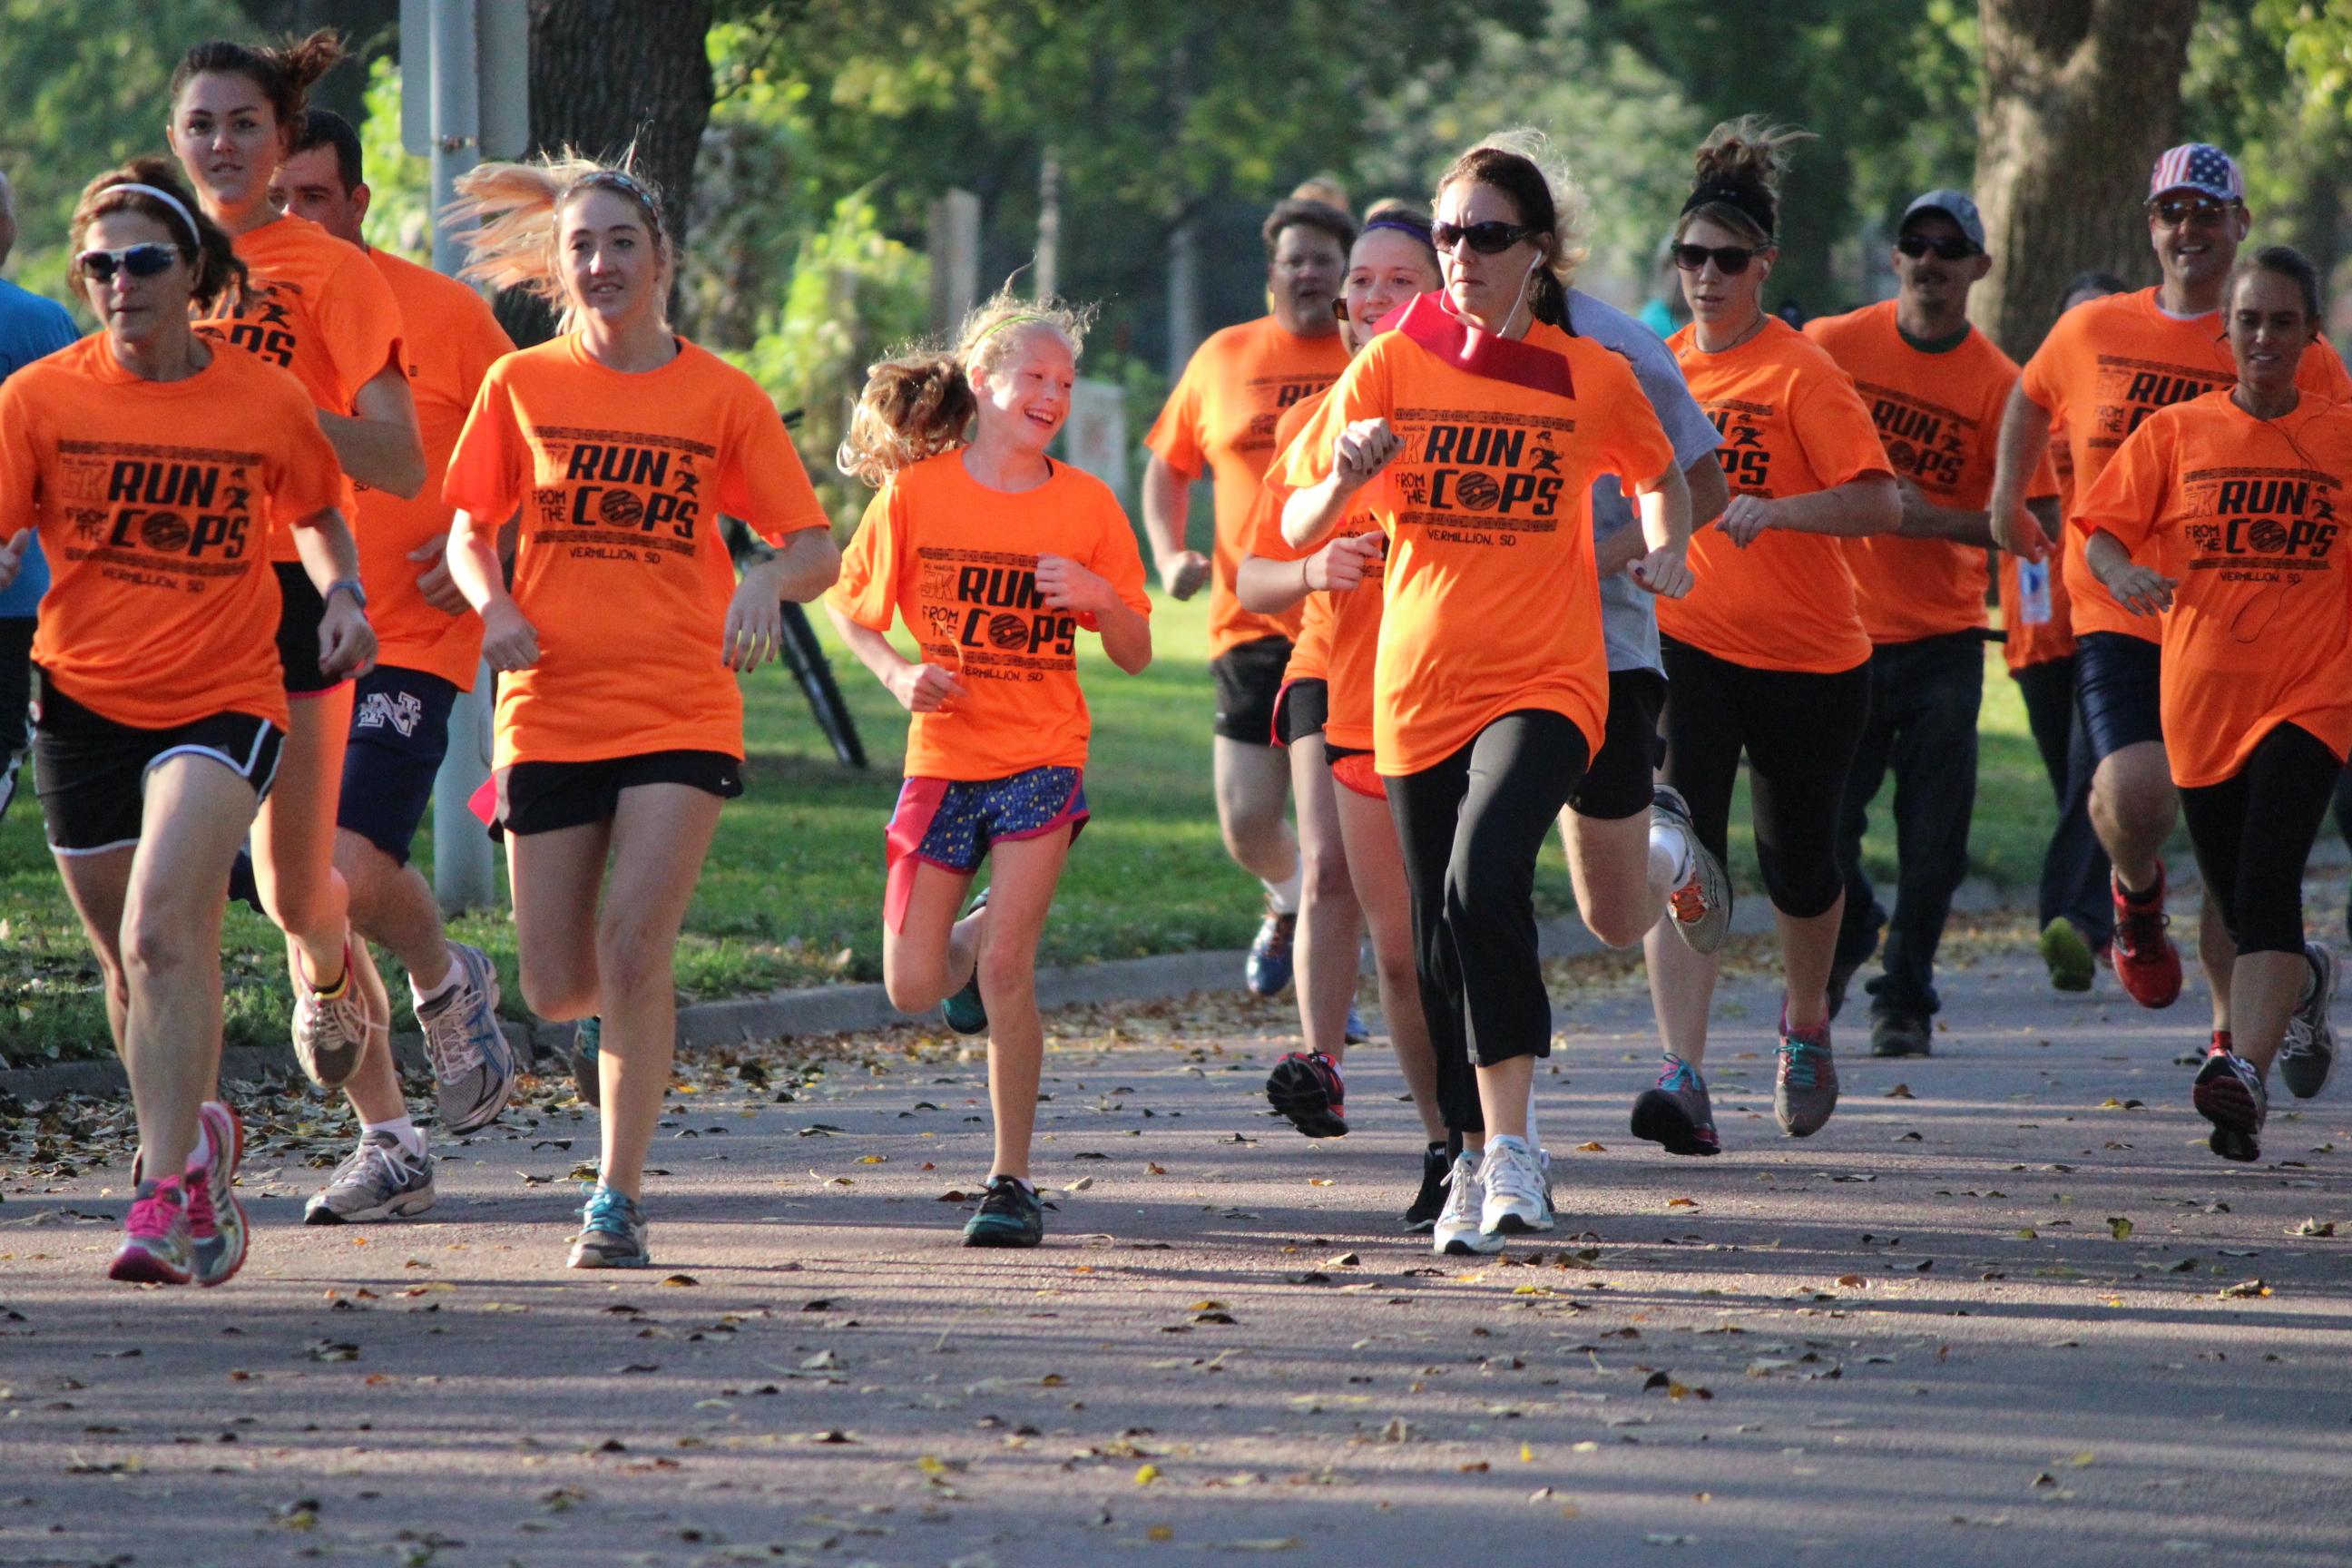 5K provides positive interaction with law enforcement